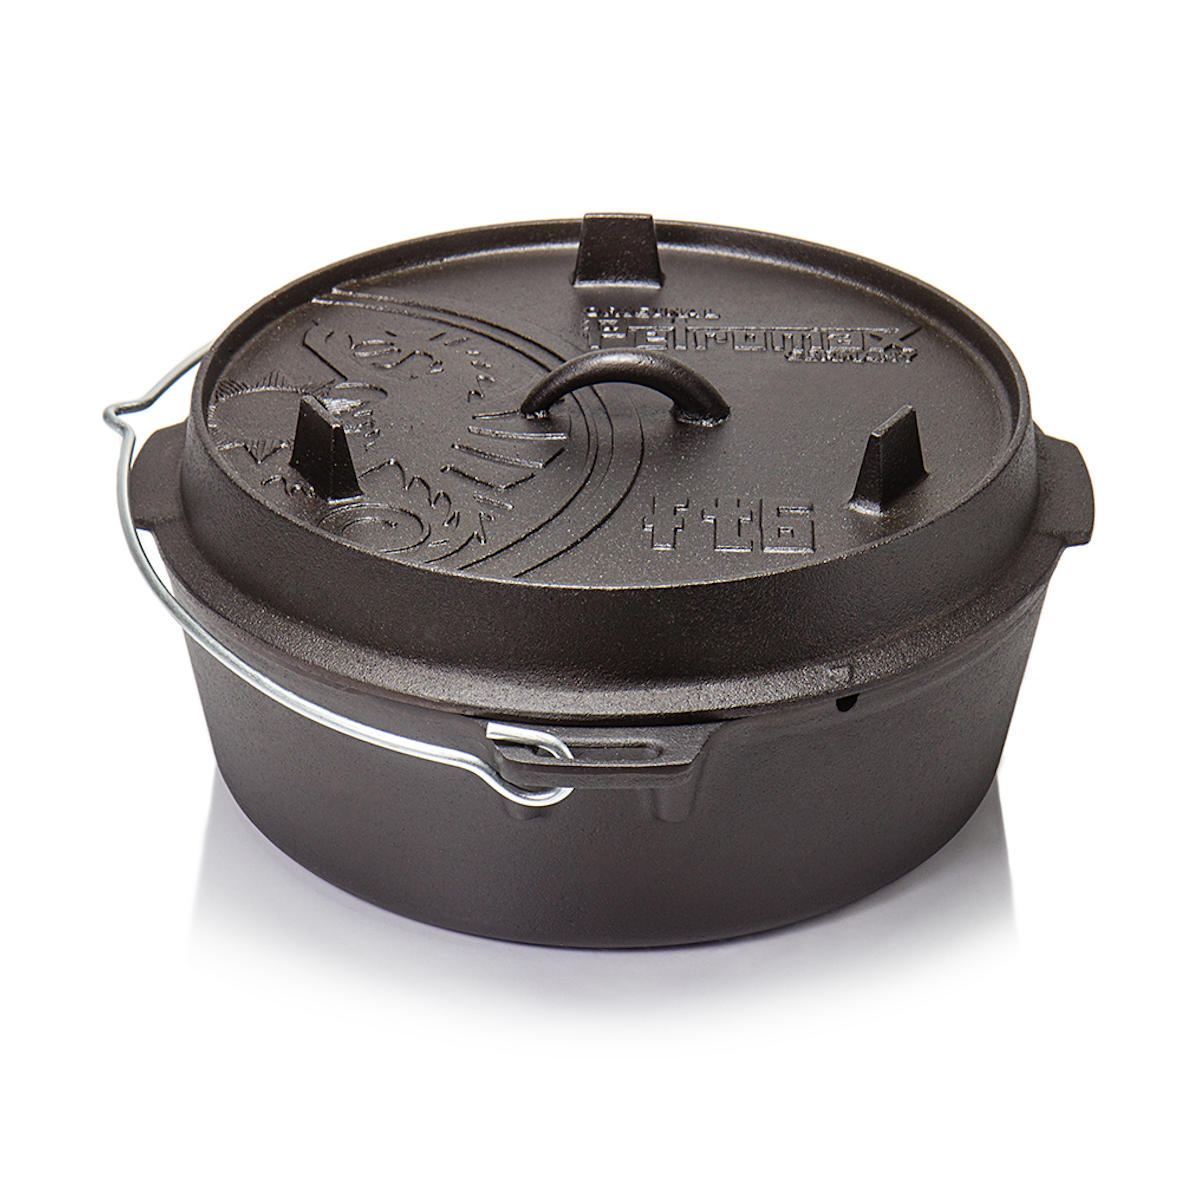 Enders Switch Grid Dutch Oven | 000007795